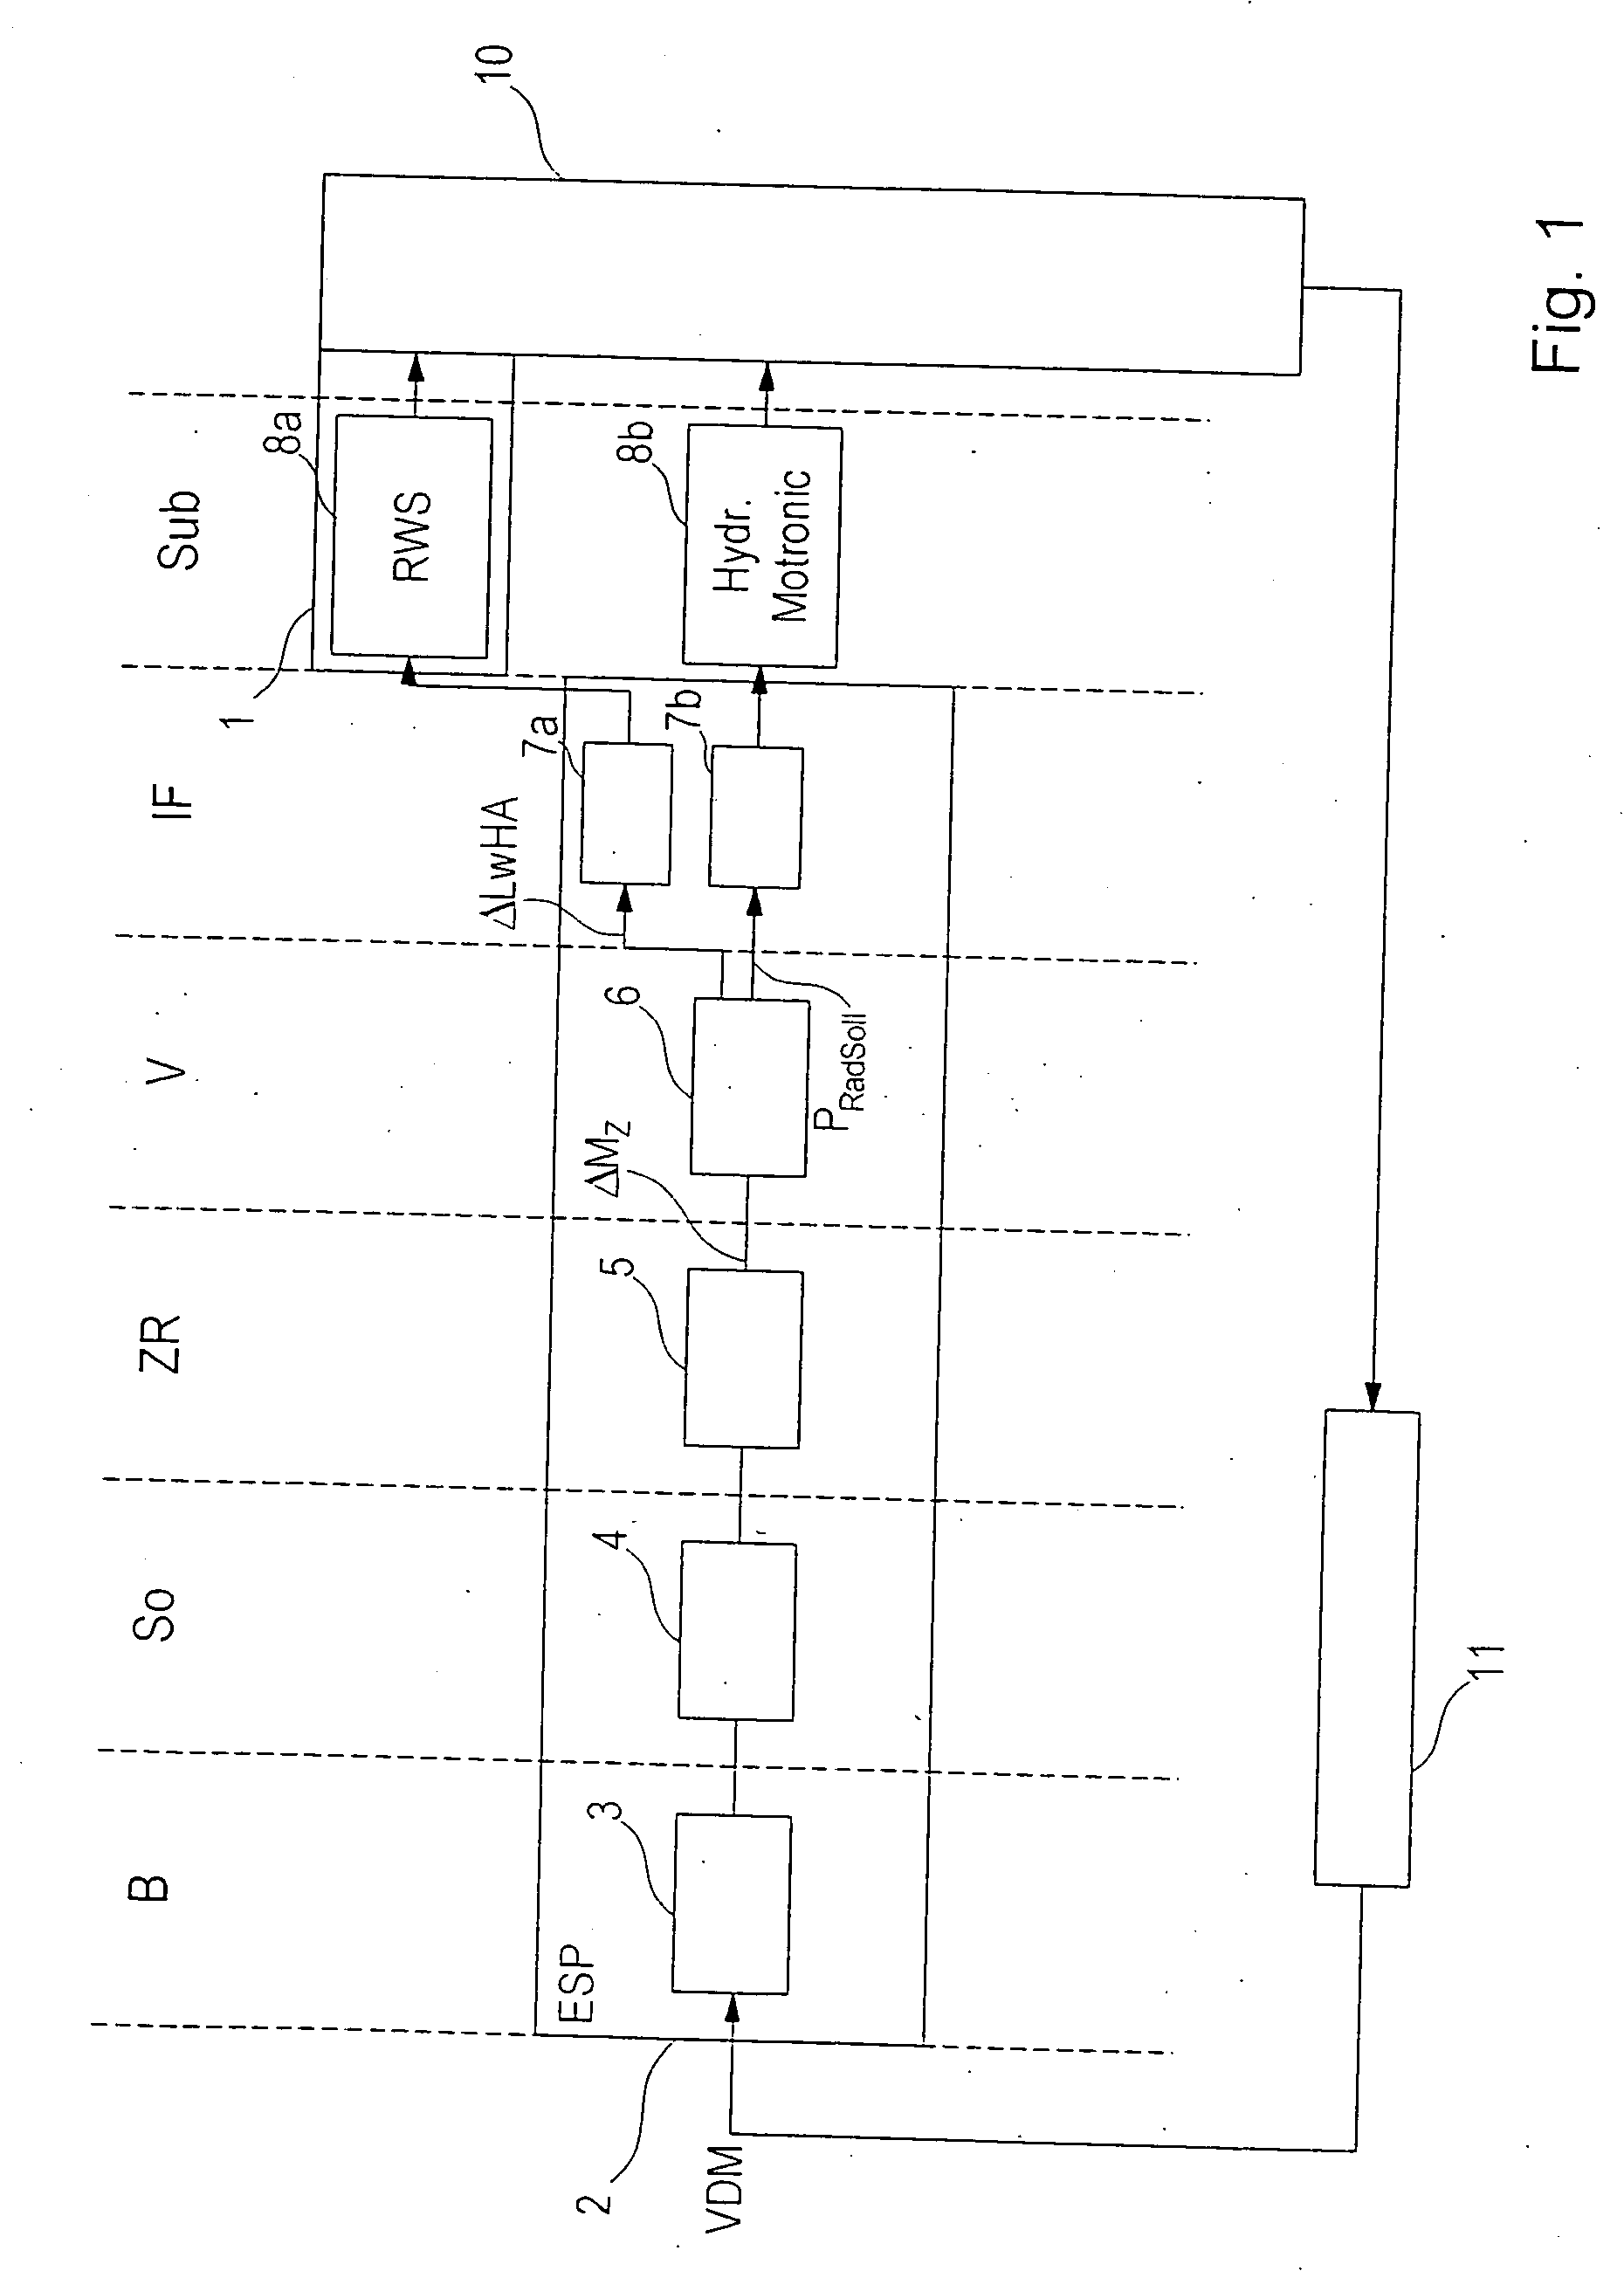 Coordination of a vehicle dynamics control system with a rear-wheel steering system